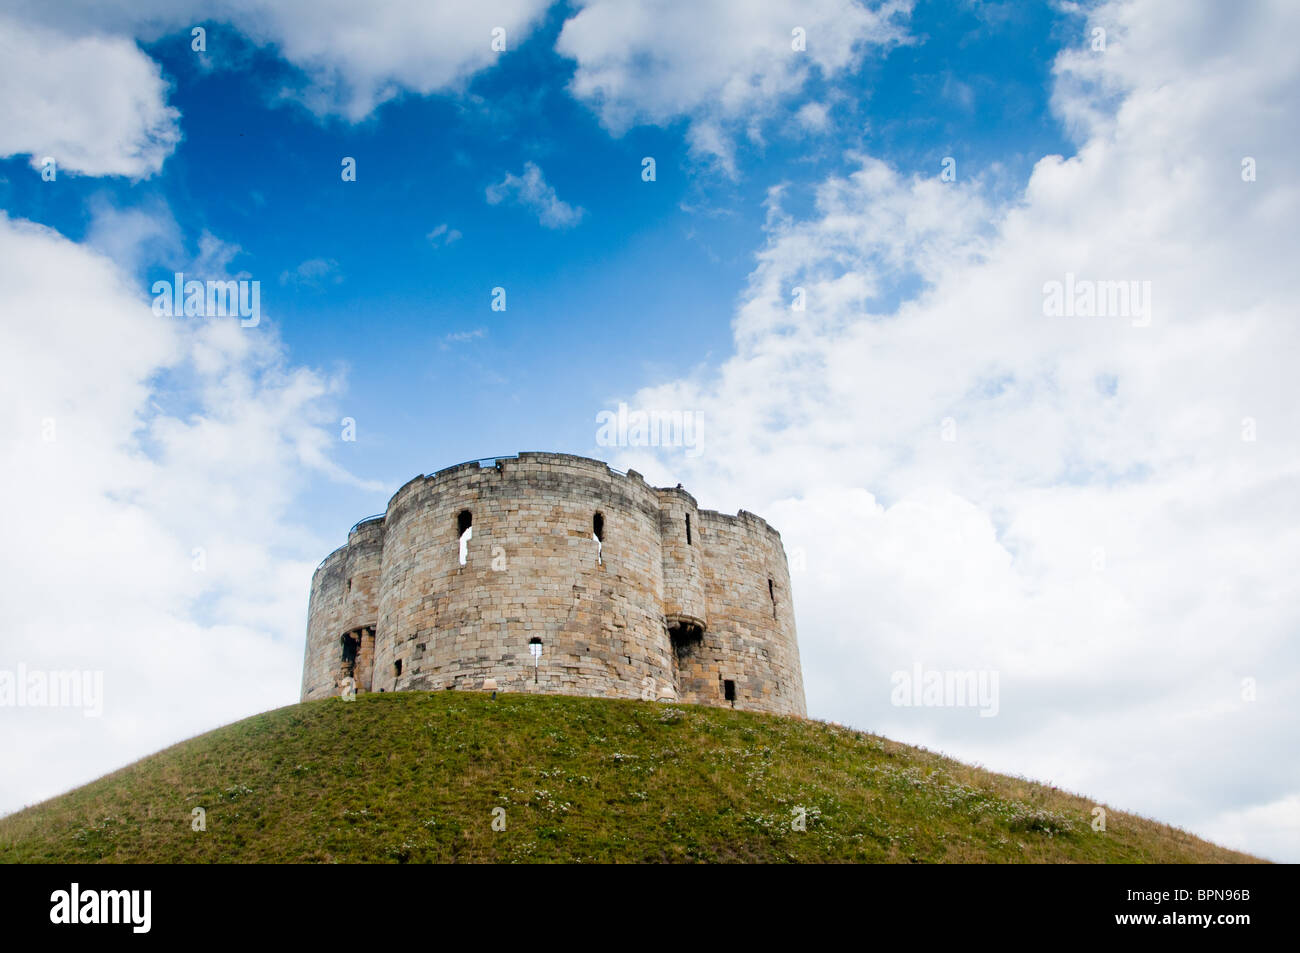 Clifford Tower in York, Northern England. Stock Photo